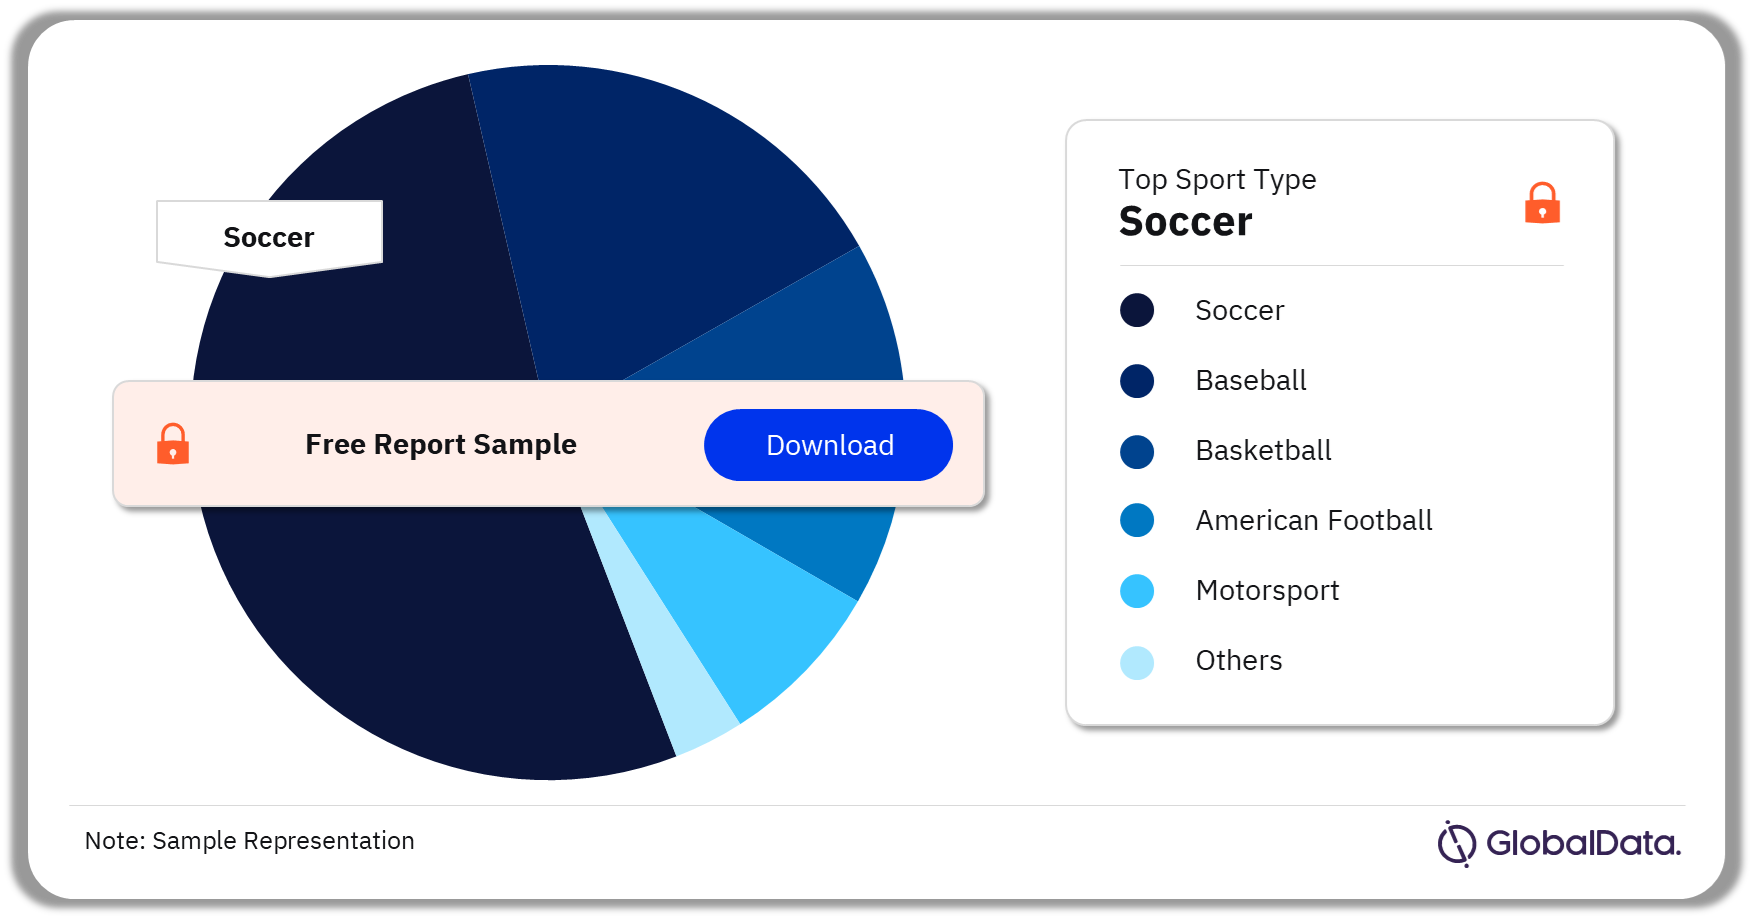 Financial Services Sports Sponsorship Market Analysis by Sport Types, 2023 (%)